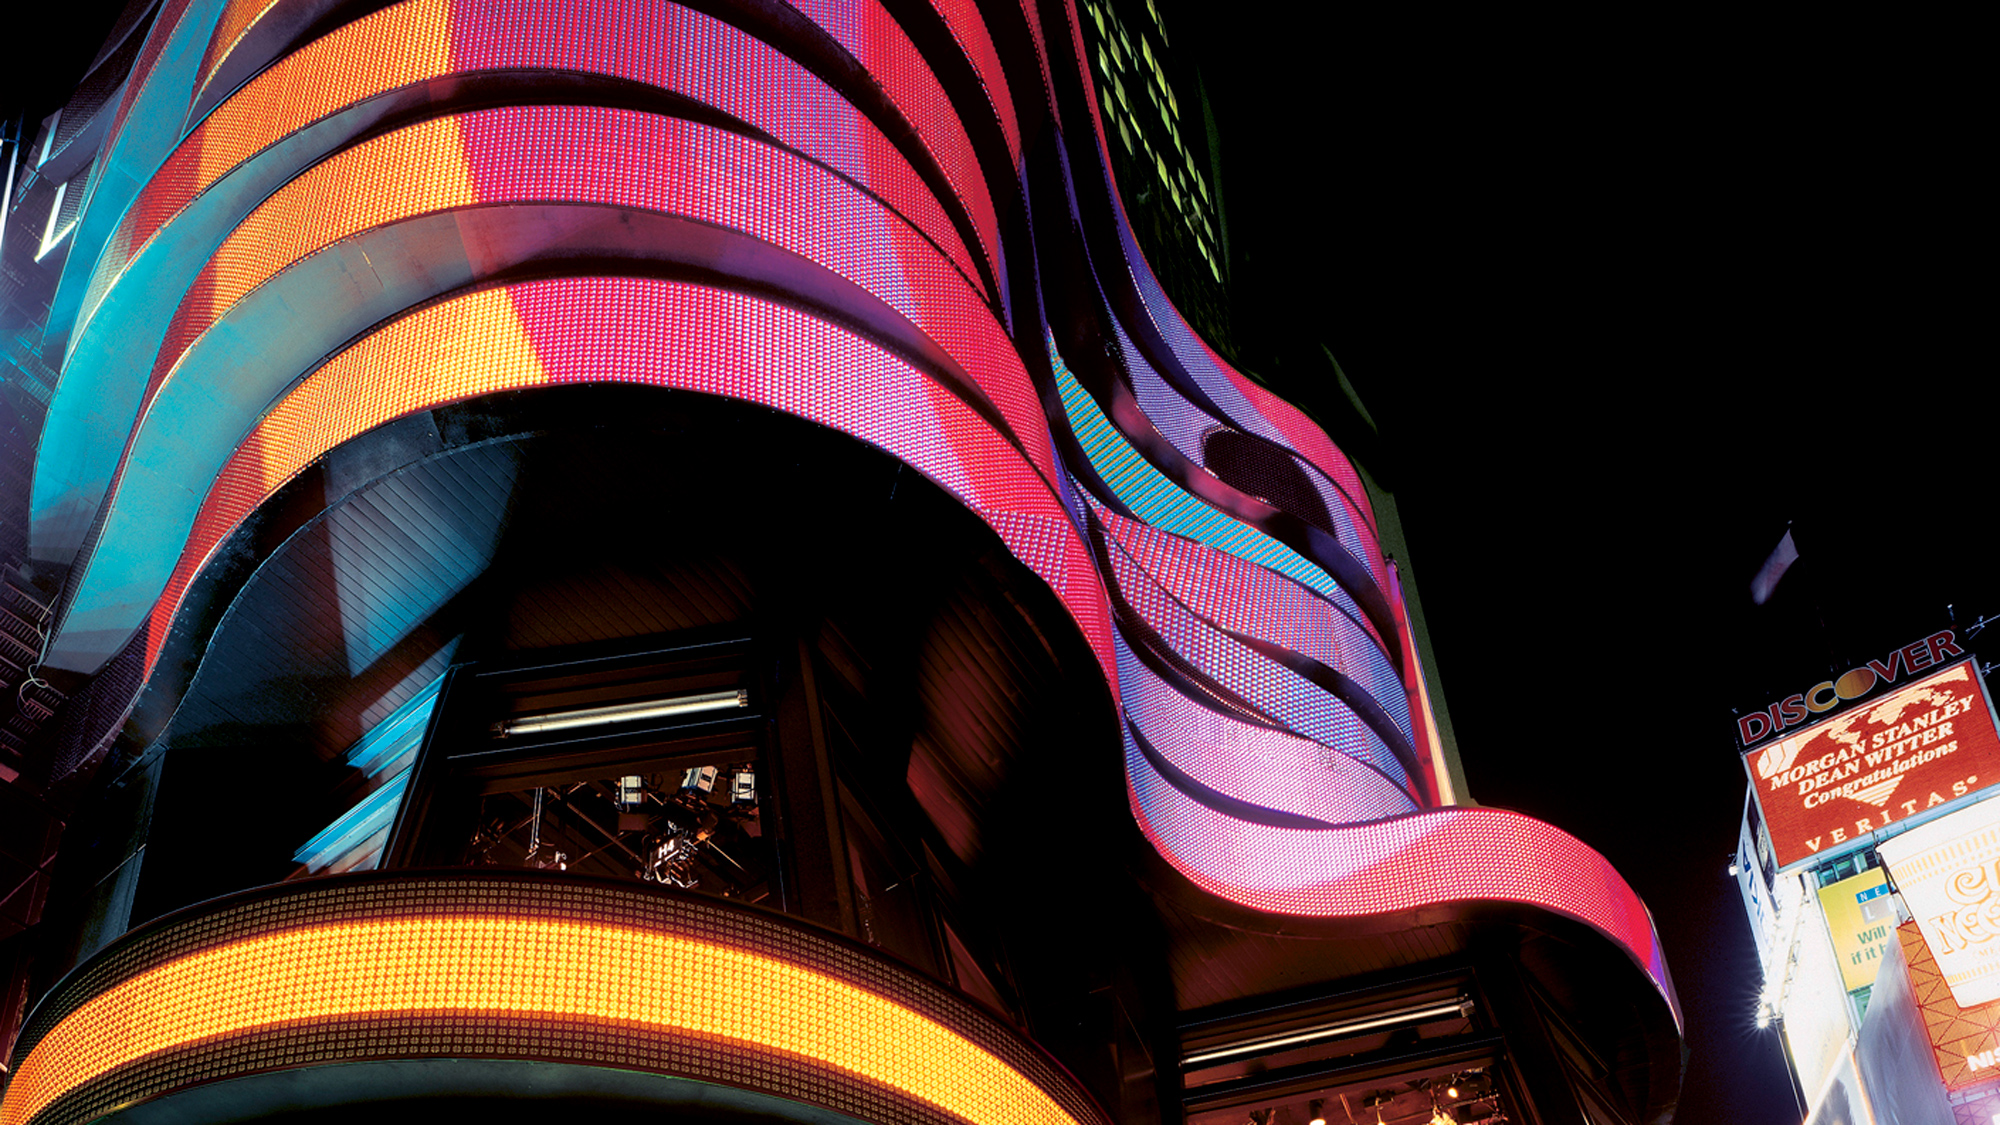 Night view of a dynamic building facade featuring undulating ribbons of LED screens, casting vibrant hues of red, blue, and yellow light. The structure's curves juxtapose against the surrounding urban signage, creating a modern, lively atmosphere.